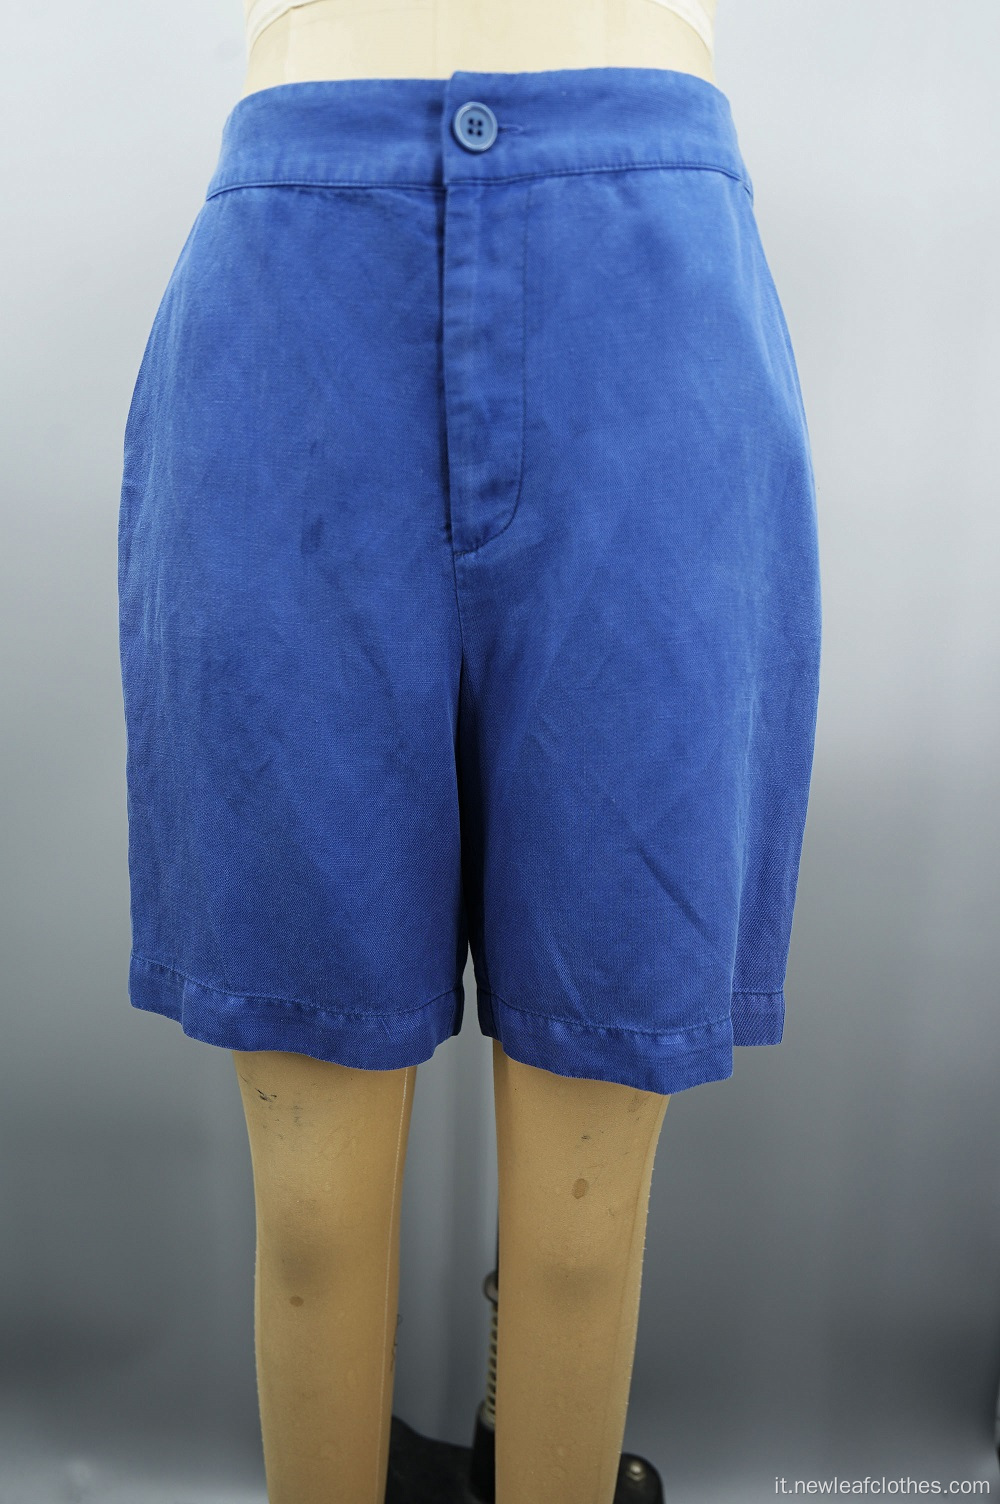 Nuove donne Casuals Casual High Wel Shols Shorts